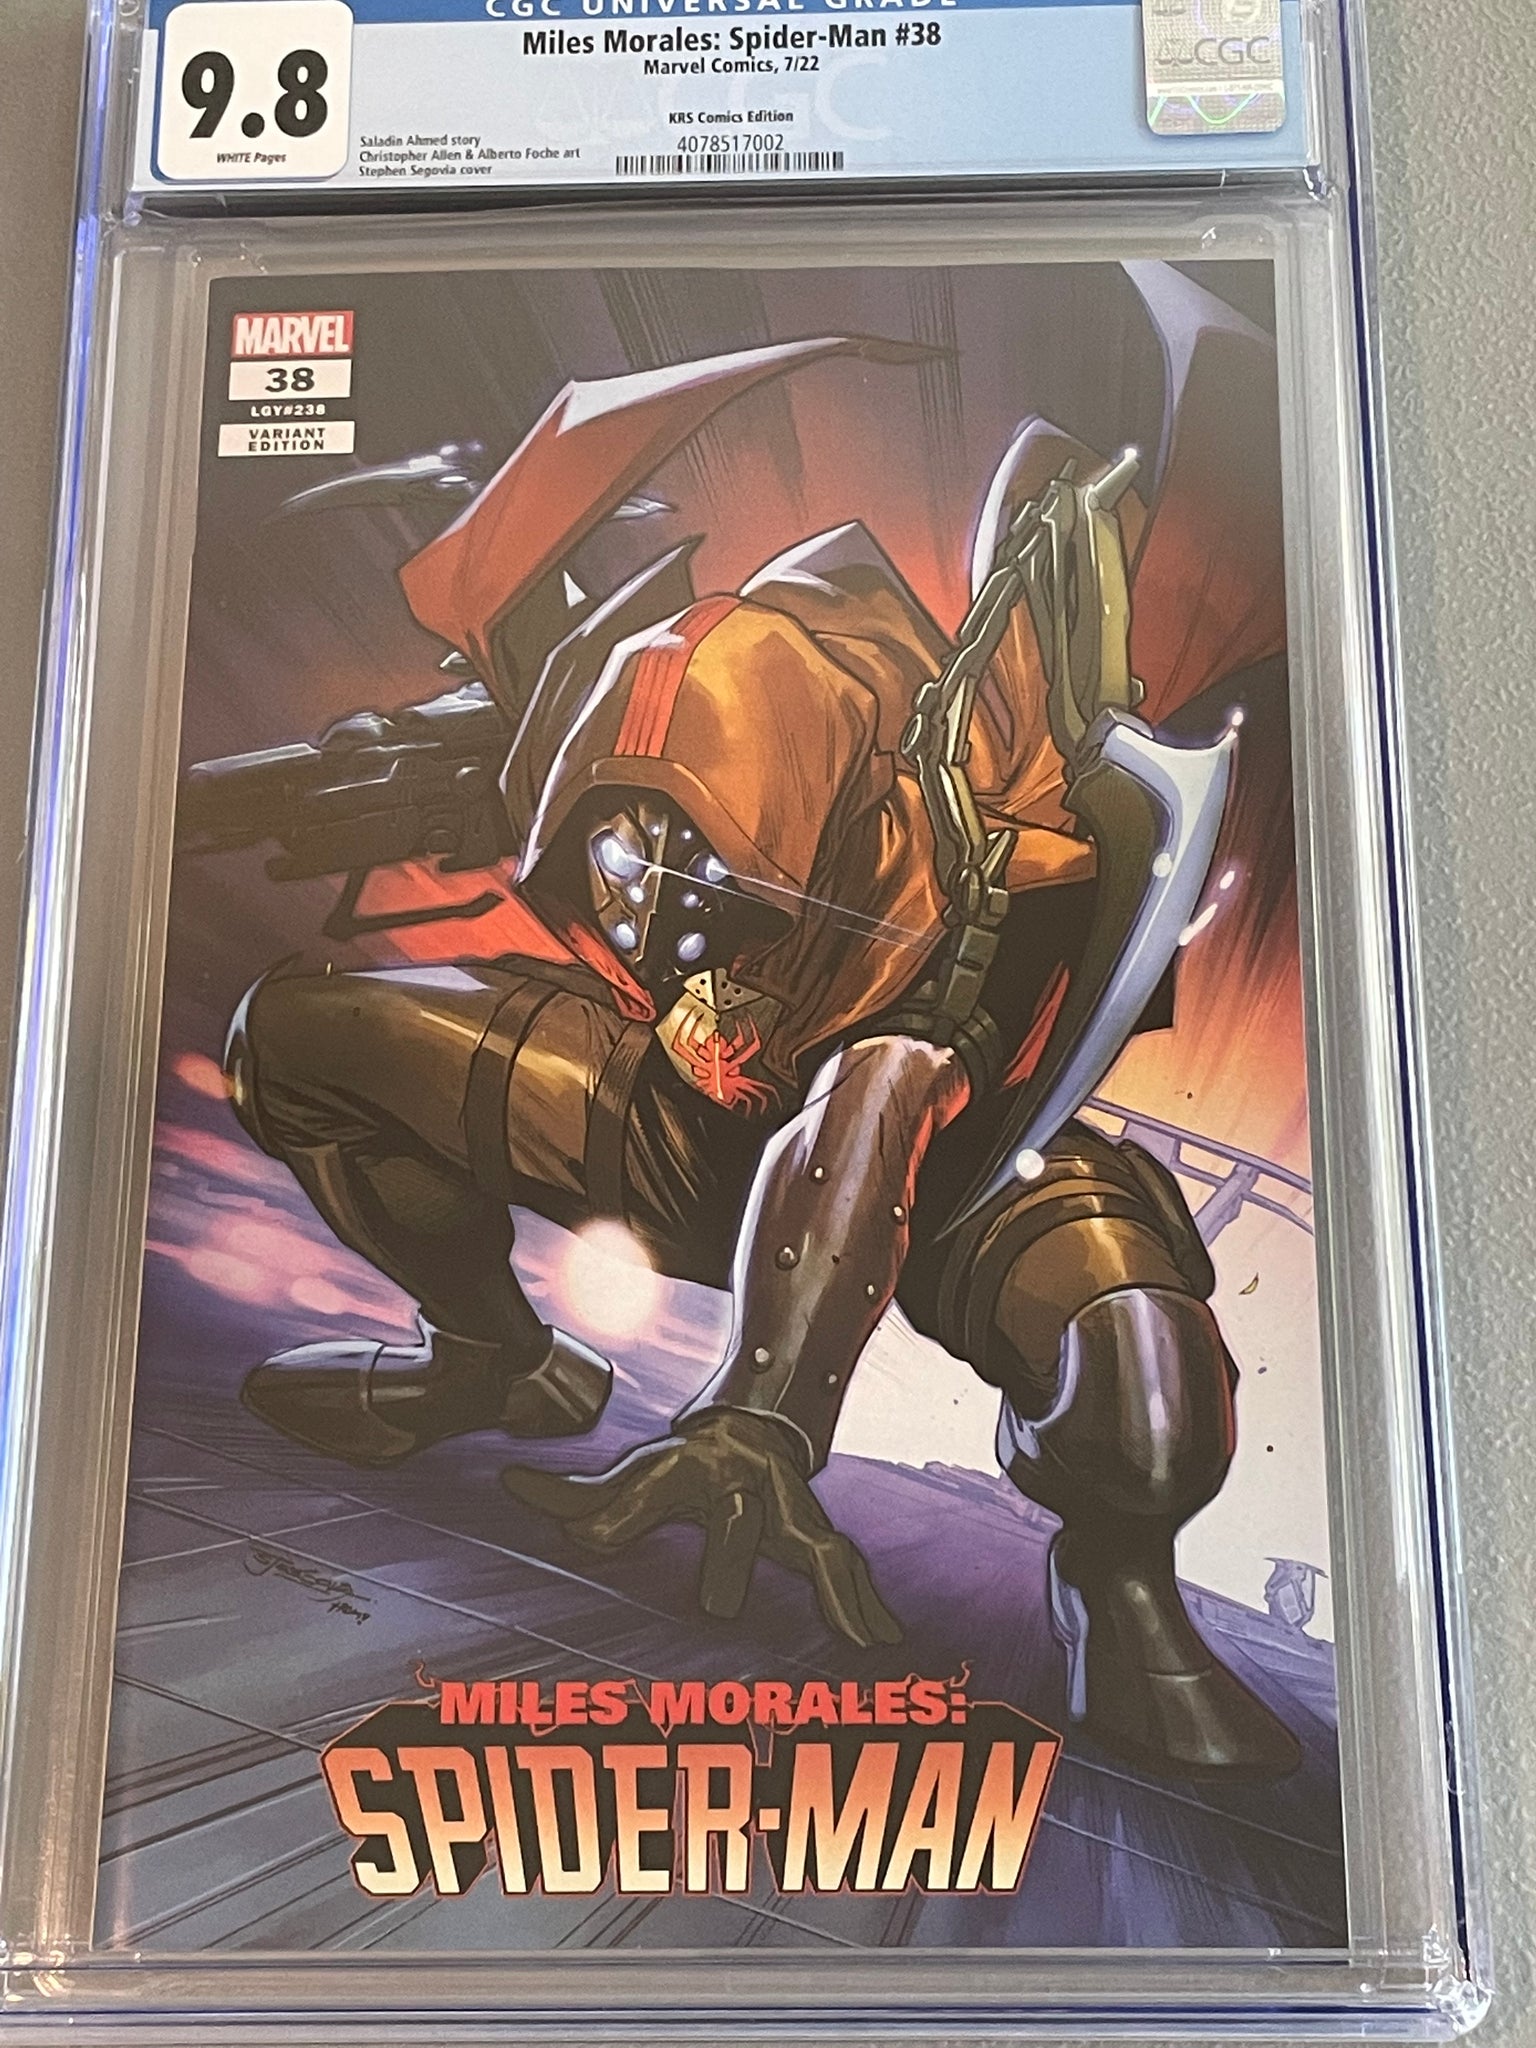 MILES MORALES: SPIDER-MAN #38 CGC 9.8 STEPHEN SEGOVIA FIRST SPIDER-SMASHER TRADE VARIANT-A